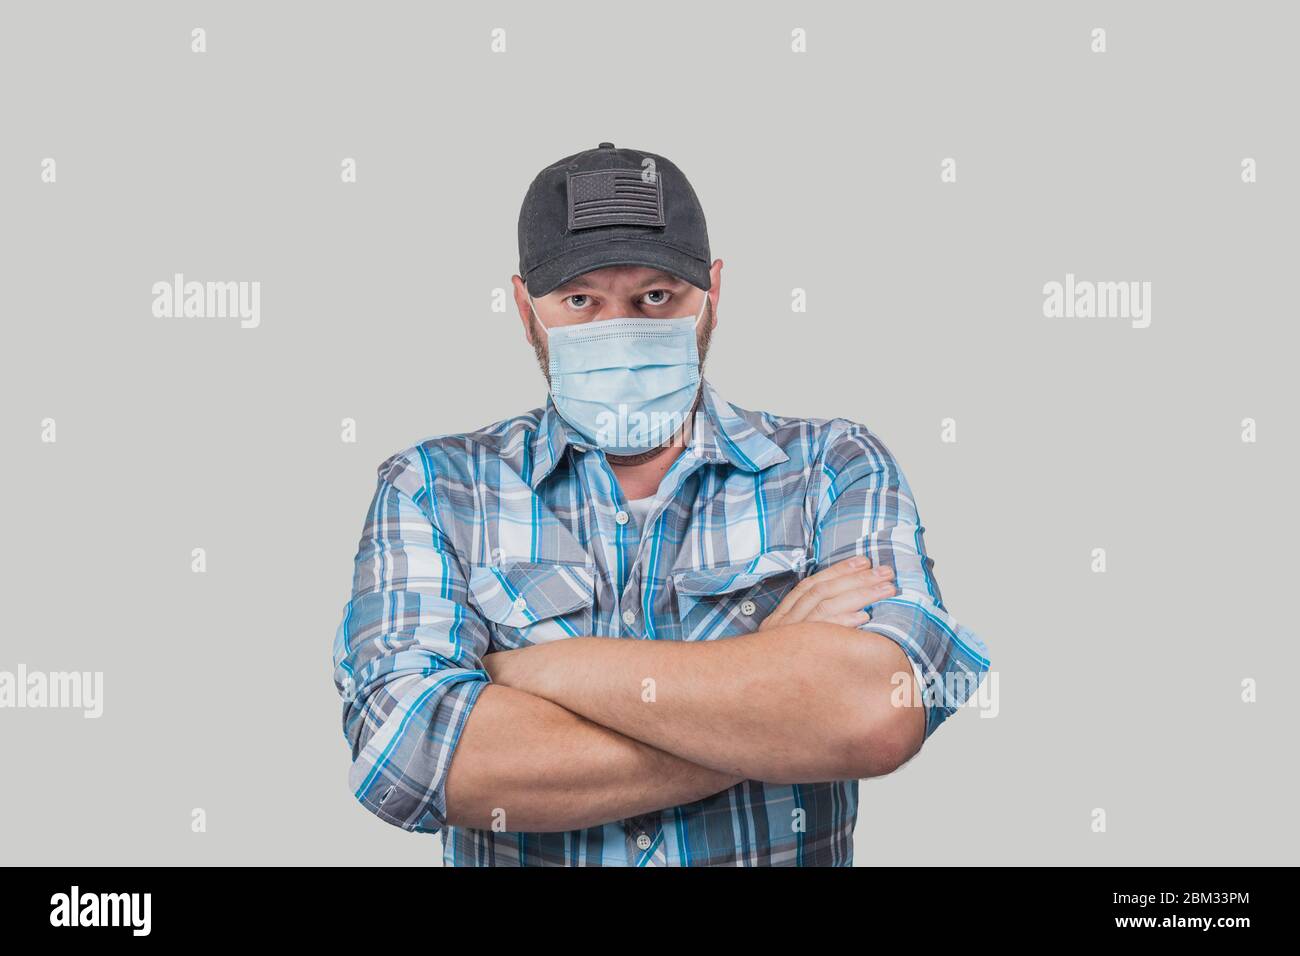 Caucasian man dressed casual with plain blue shirt and black baseball cap wears face medical hat and looks angrily at the camera. Stock Photo